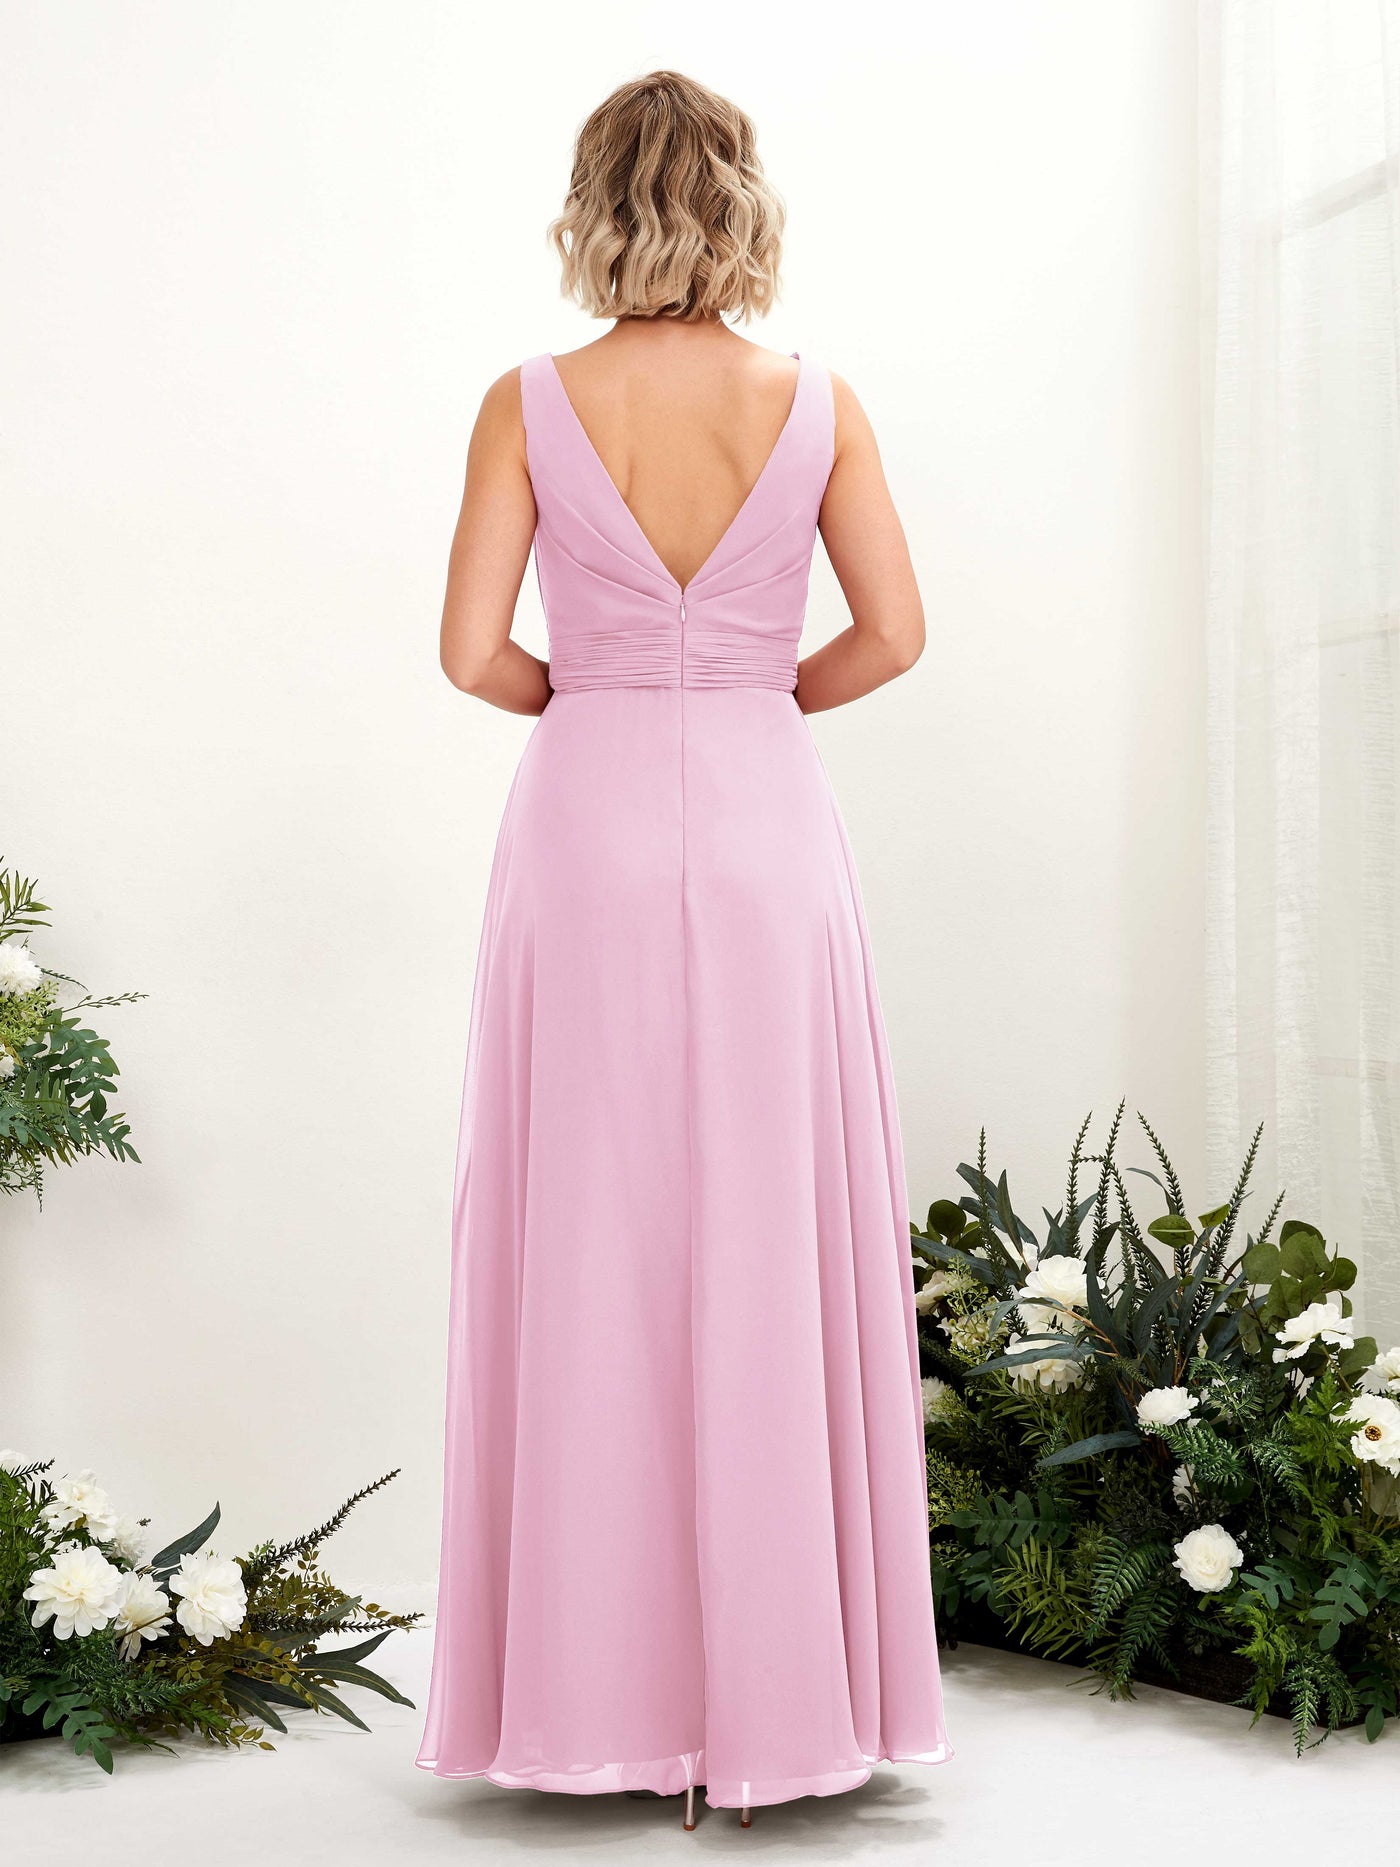 Candy Pink Bridesmaid Dresses Bridesmaid Dress A-line Chiffon Bateau Full Length Sleeveless Wedding Party Dress (81225839)#color_candy-pink